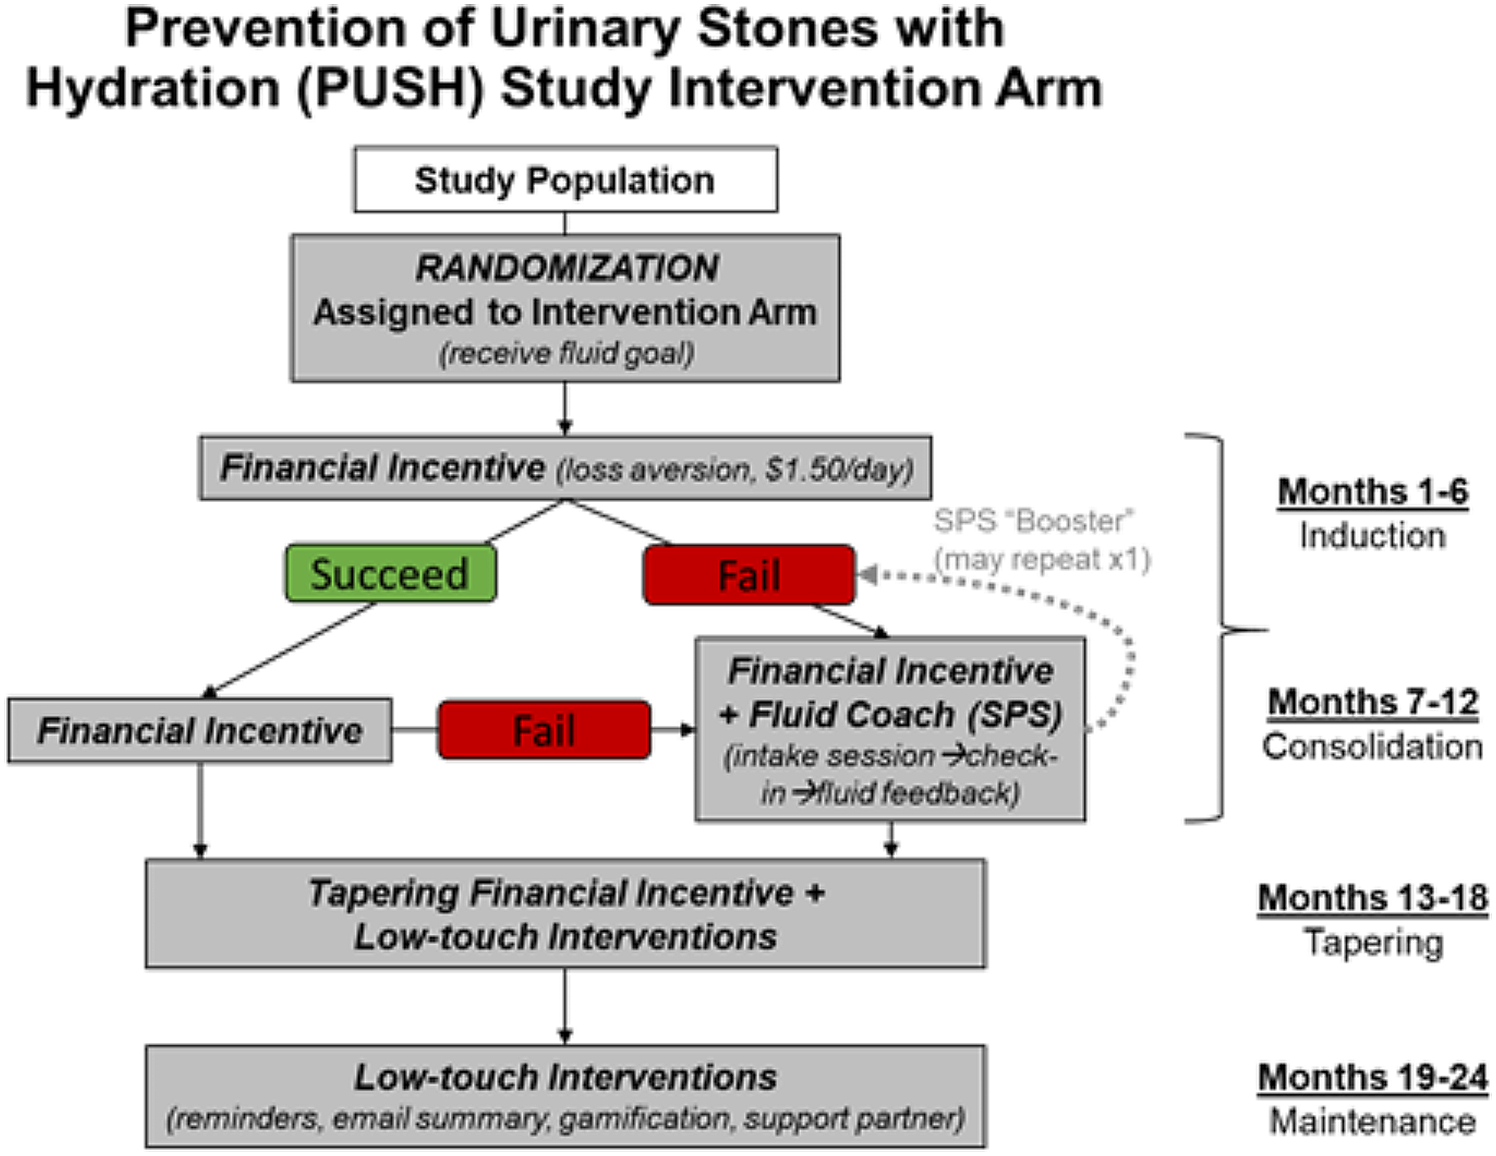 Using structured problem solving to promote fluid consumption in the prevention of urinary stones with hydration (PUSH) trial